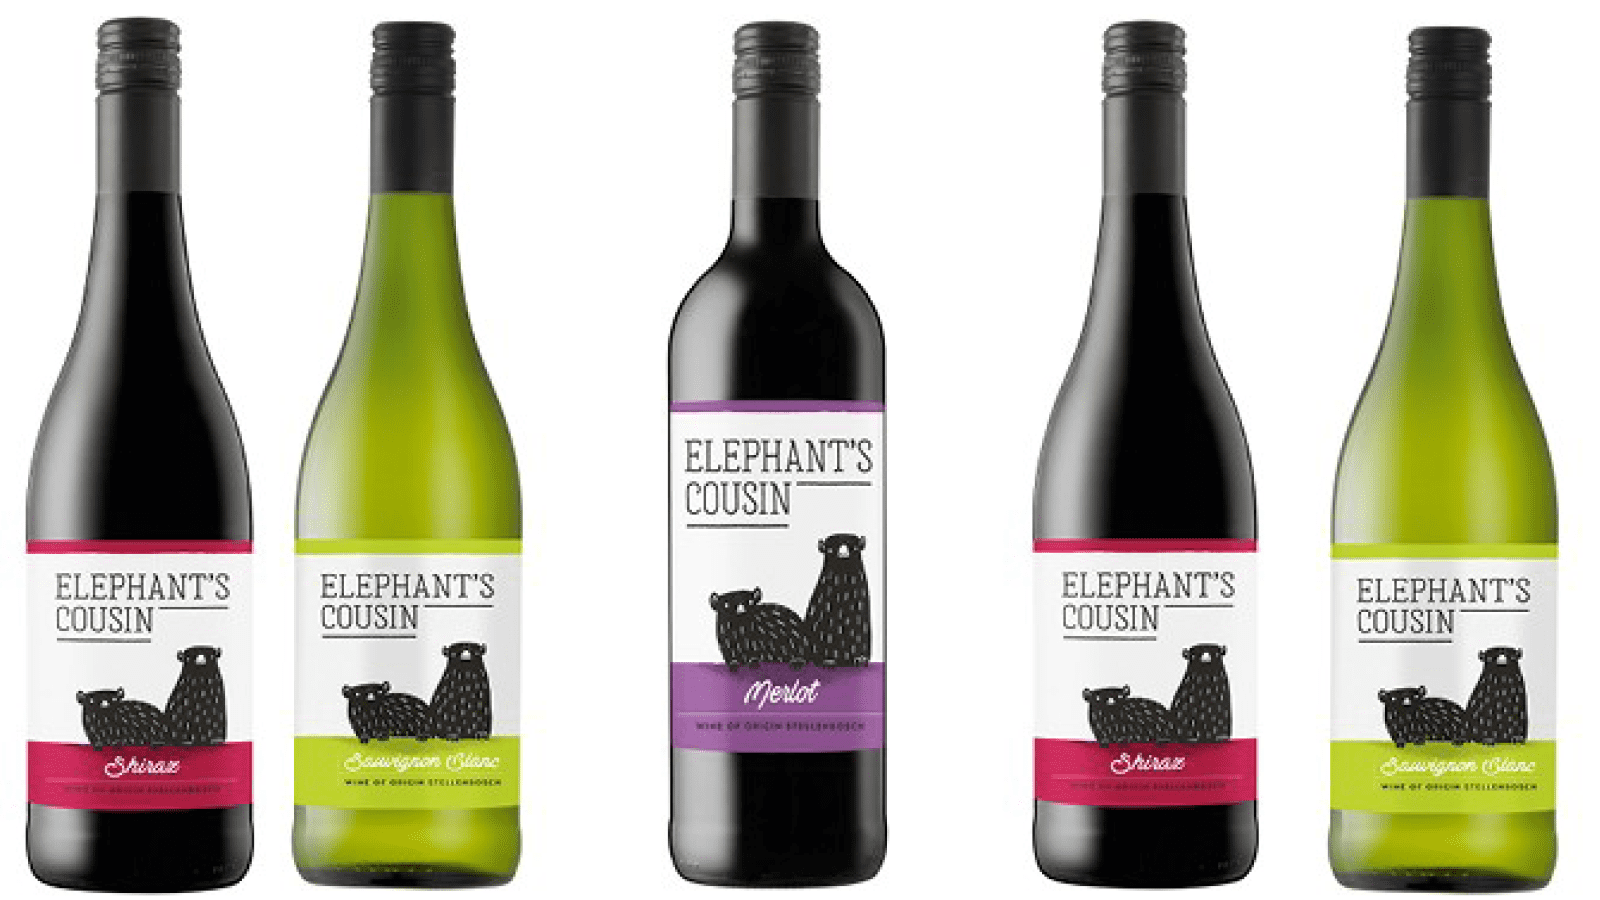 Shoprite collaborates with South African wine farmers to launch new private label wine brand, rescuing ailing industry